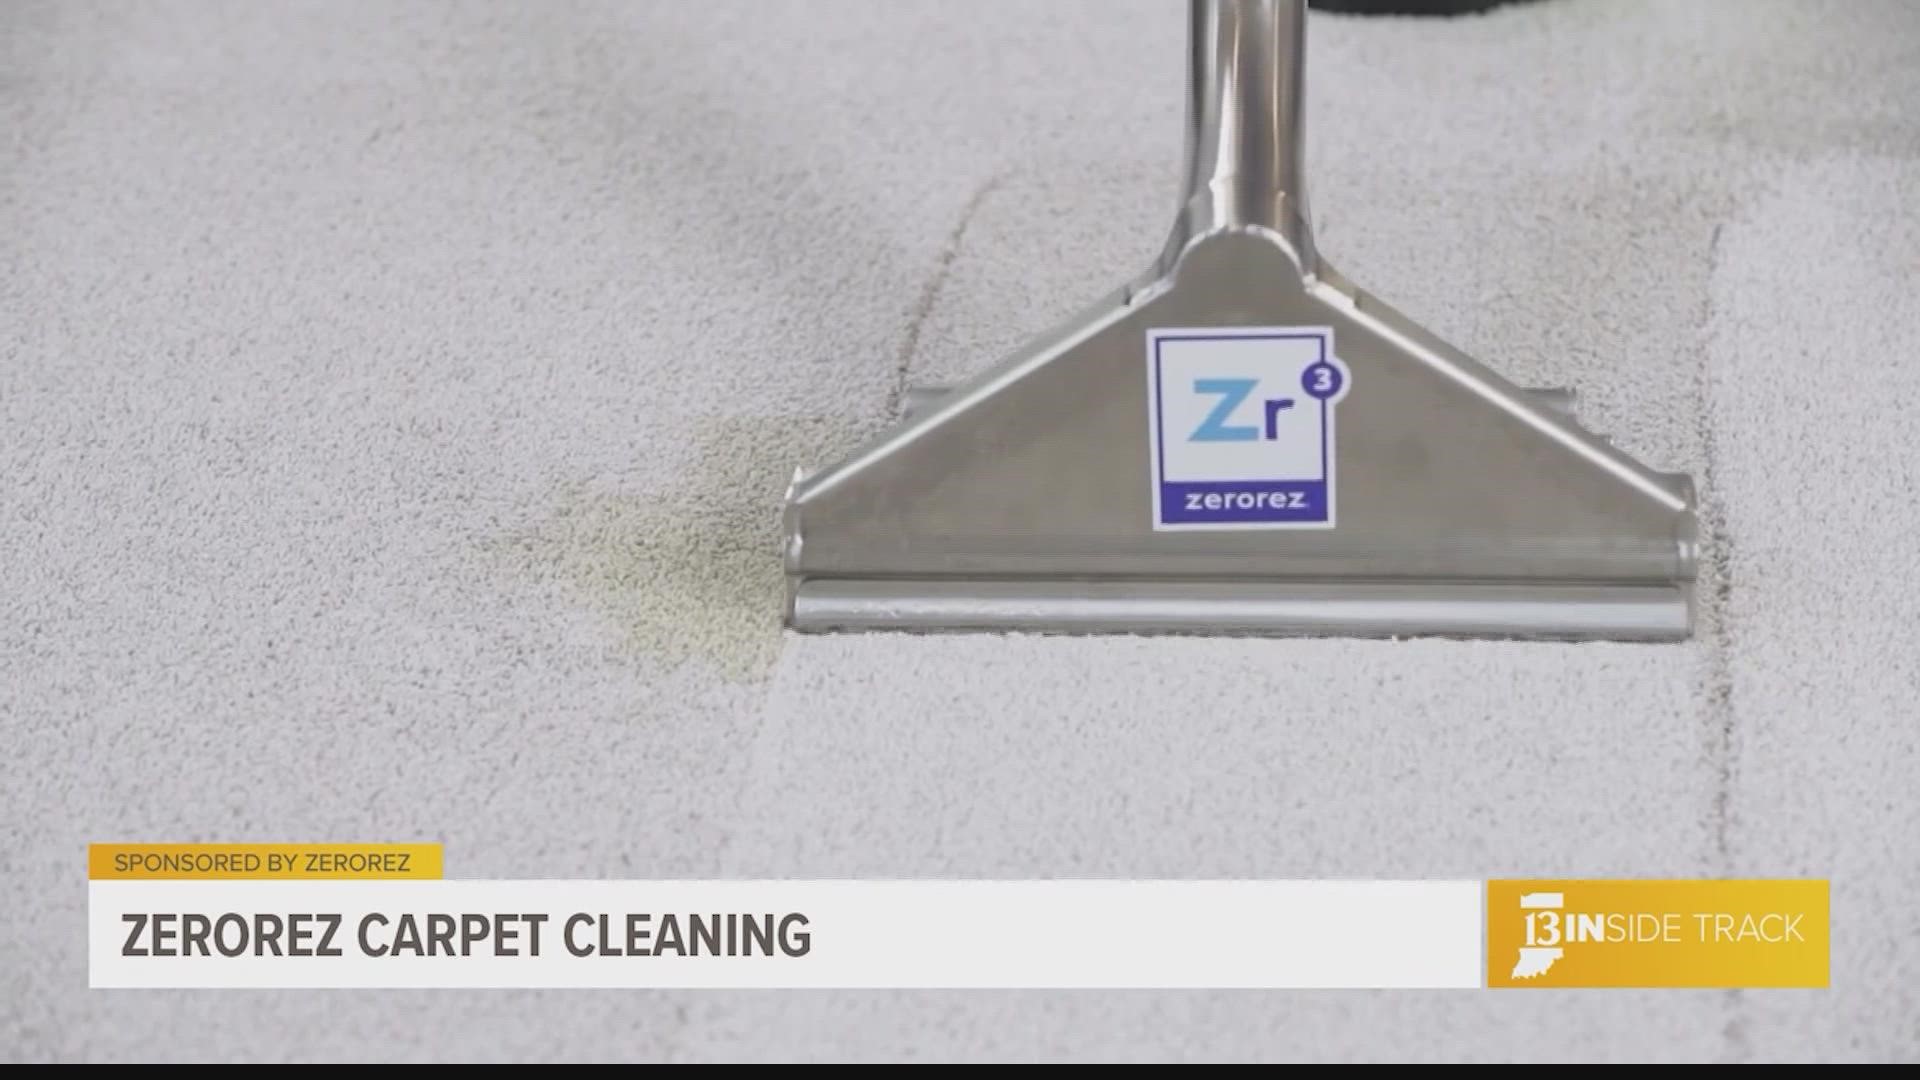 ZeroRez cleans carpet with high-alkaline water – leaving your carpet free of soap and detergent residue.